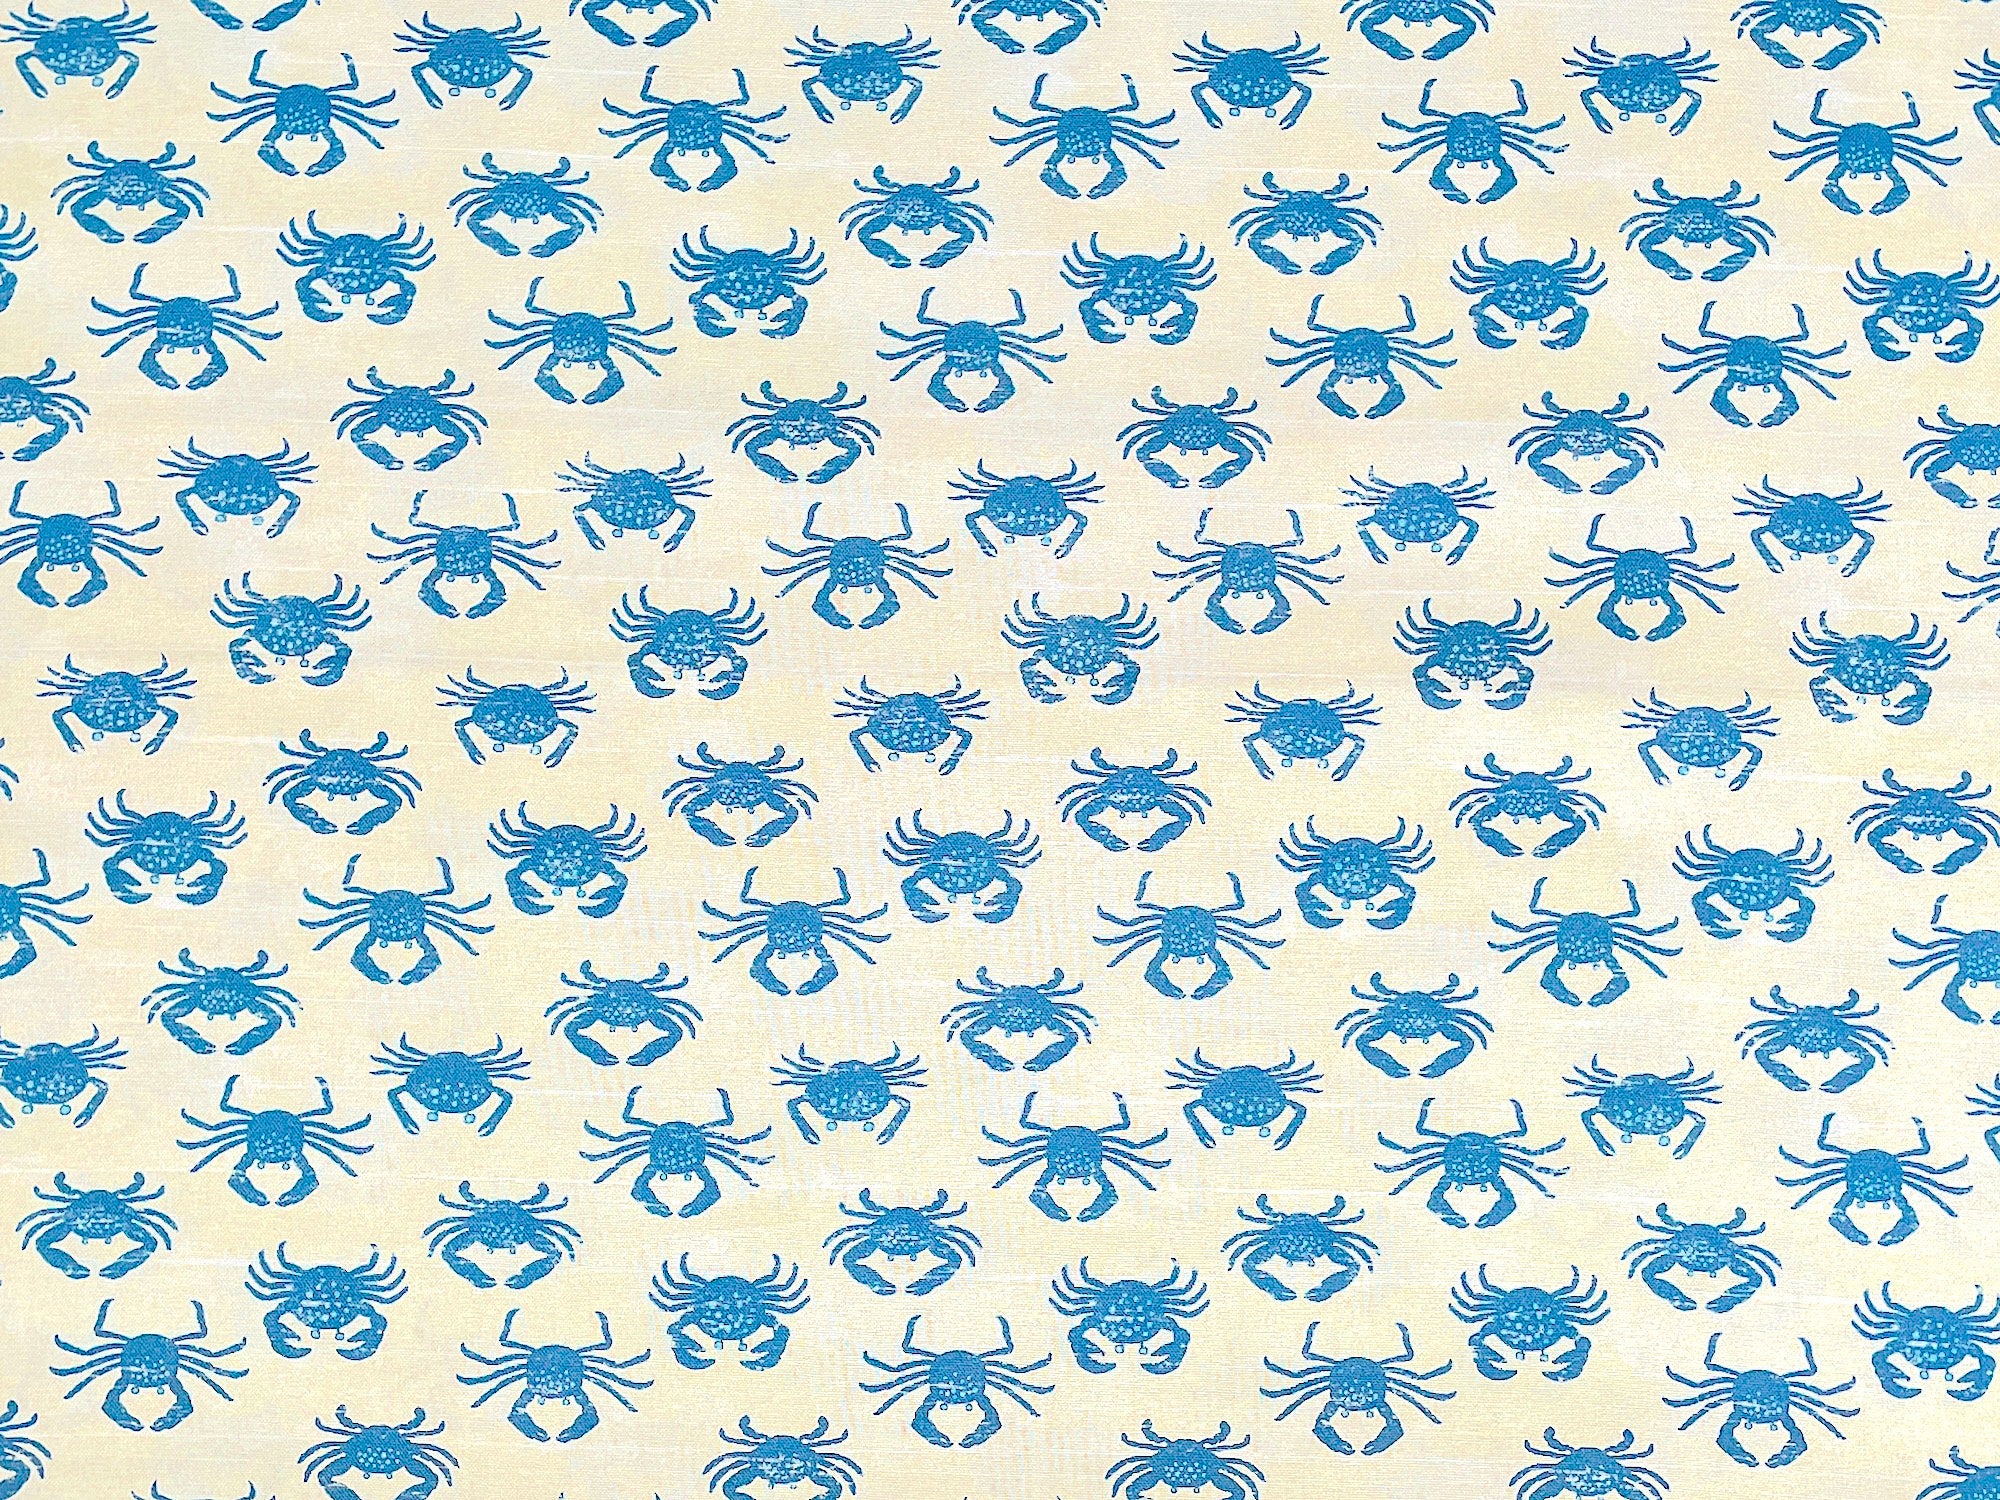 This design features Light Blue Crabs on a cream colored background.